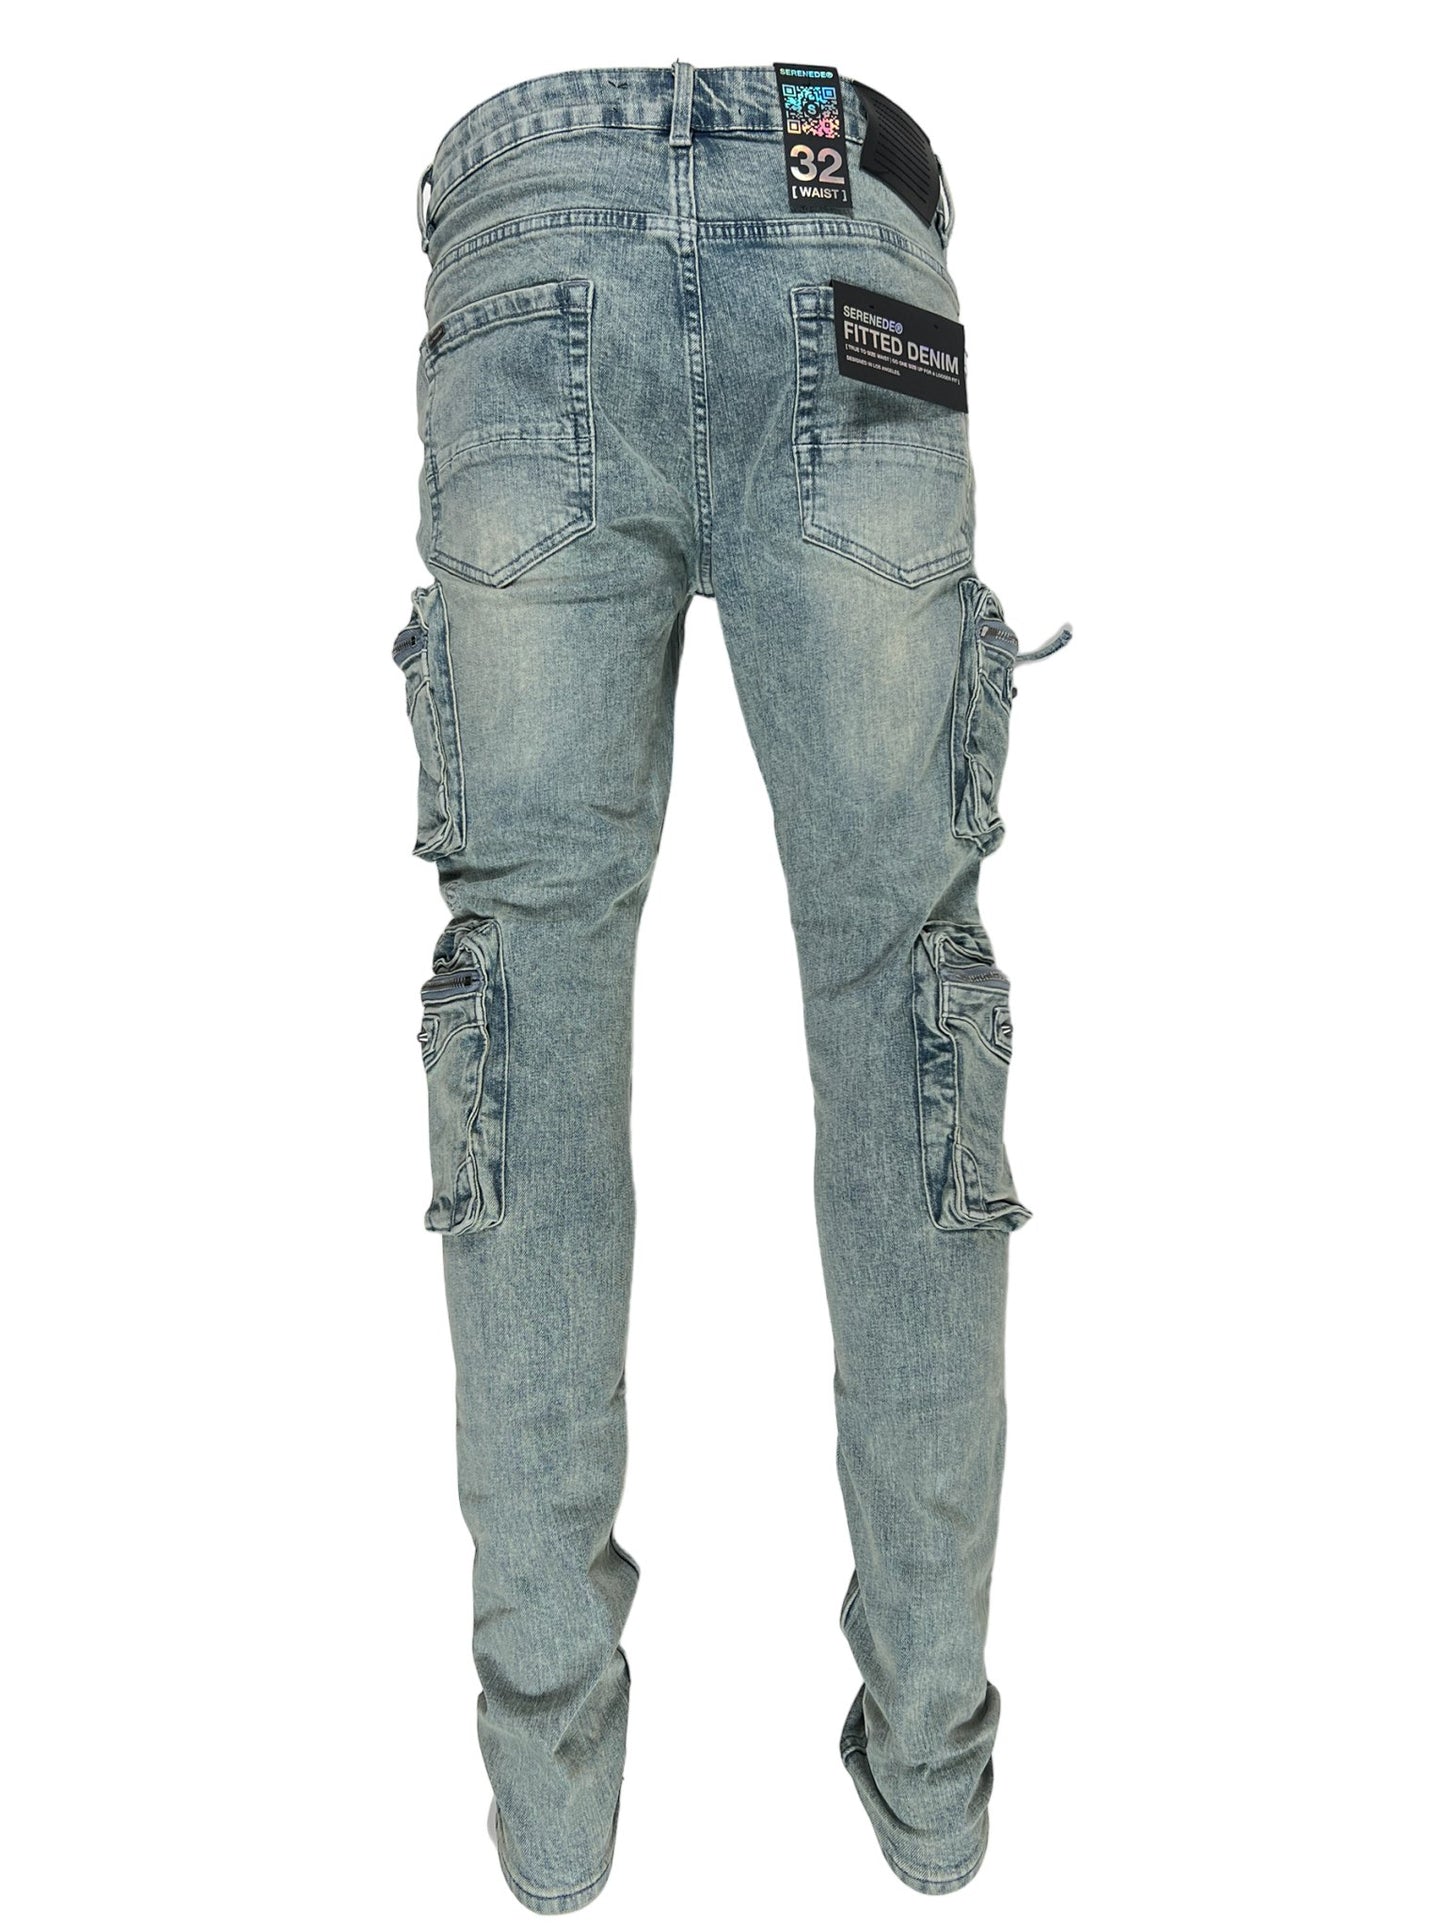 Blue skinny fit denim SERENEDE GENESYS cargo jeans with multiple cargo pockets displayed against a white background.